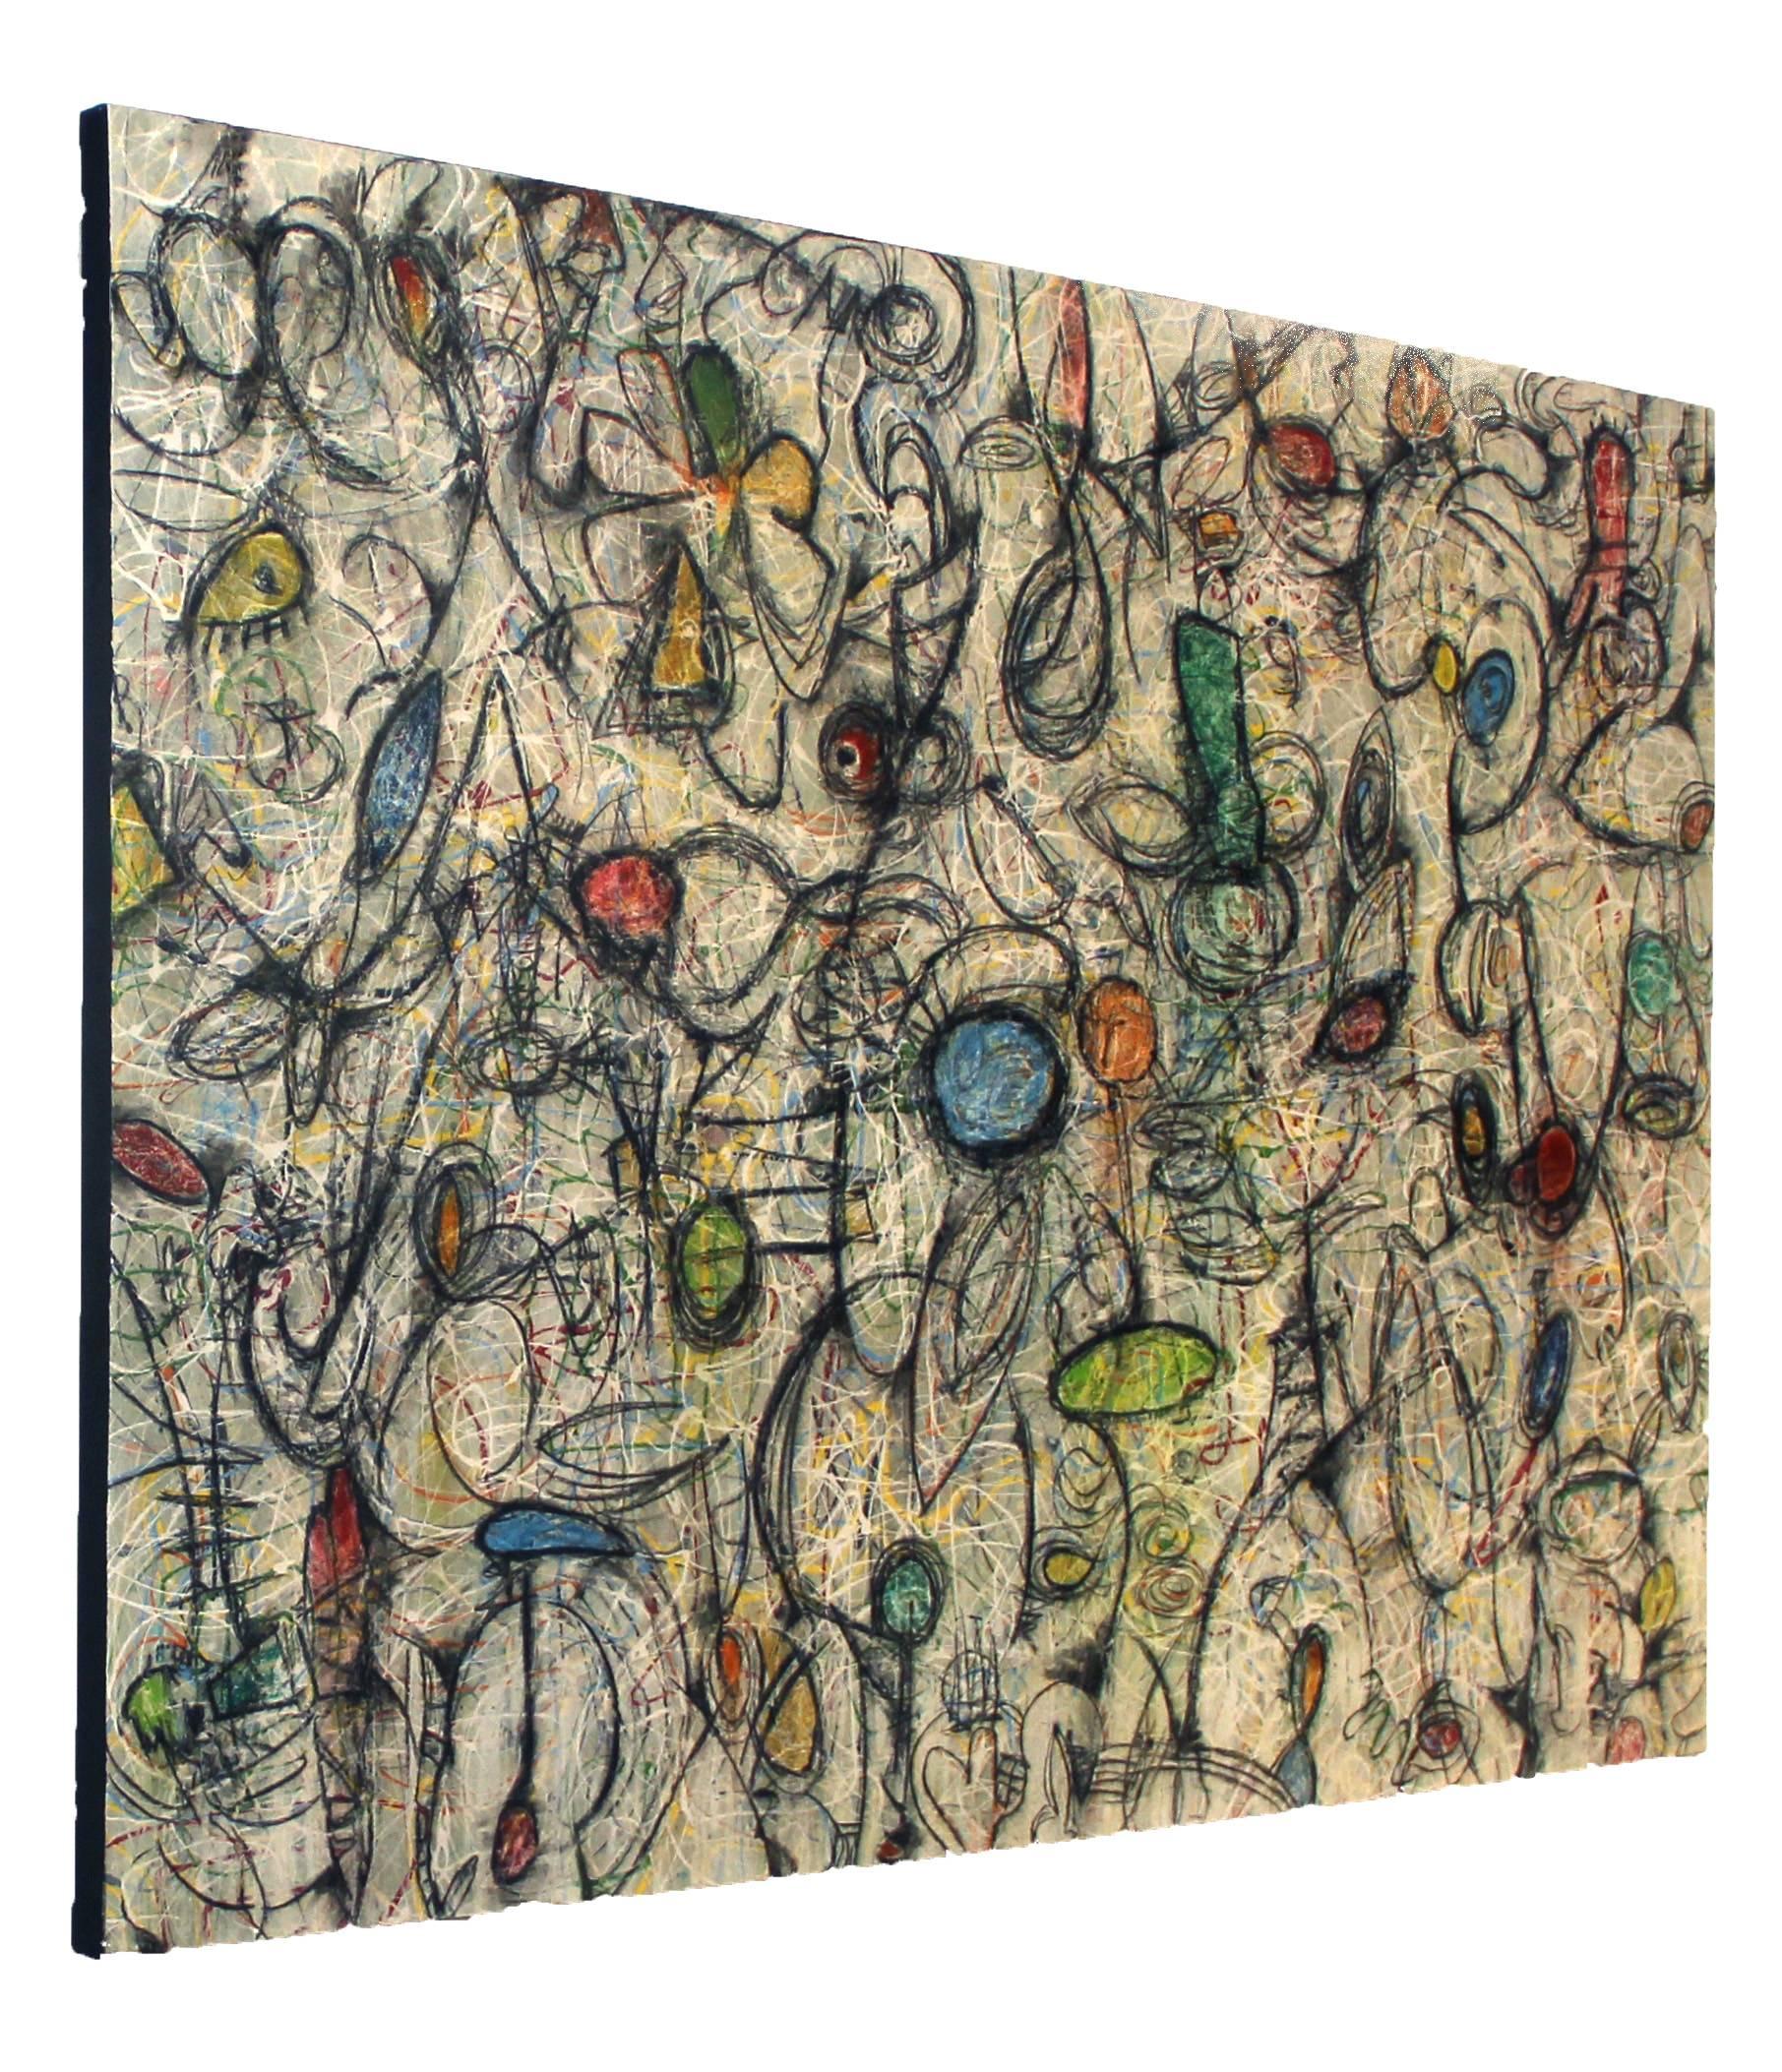 Bruce Rubenstein specializes in large-scale artworks, using huge canvases to tell his stories. This one-of-a-kind oversized 53 inch tall by 76 inch wide original artwork is a mixed media composition layered with acrylic paint, oil stick and enamel